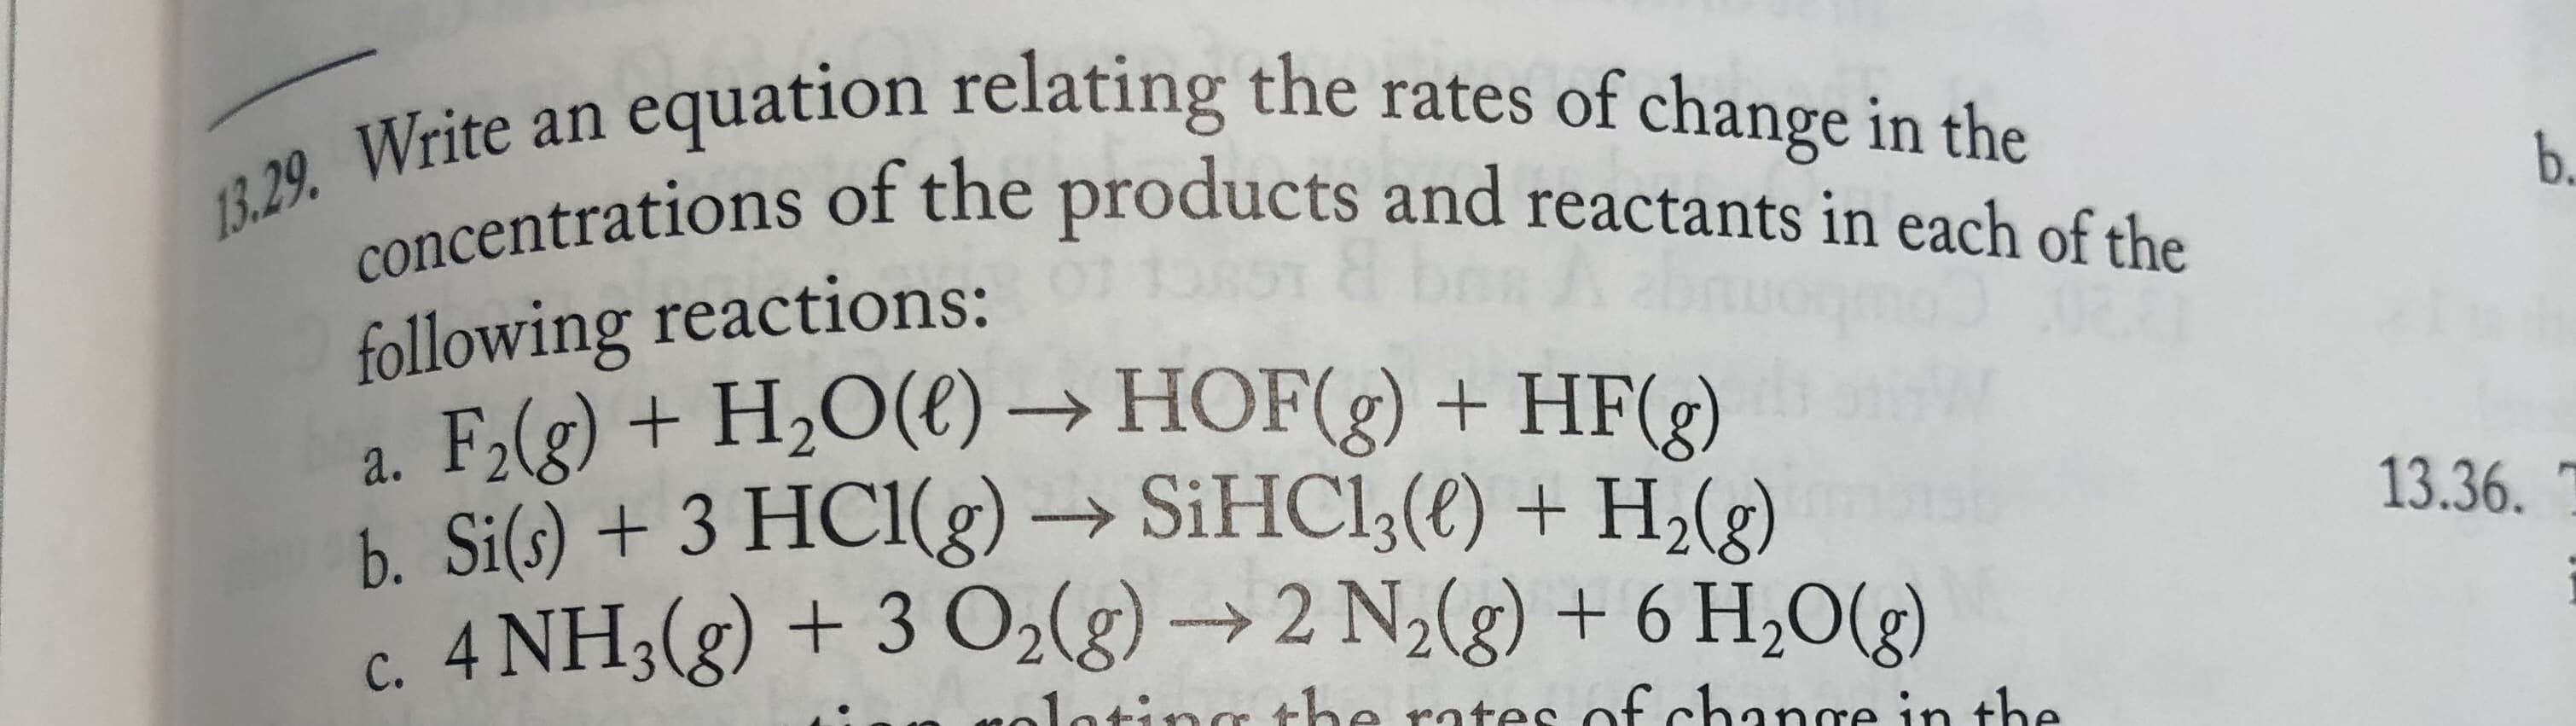 an equation relating the rates of change in the
13.29. Write
concentrations of the products and reactants in each of the
b.
following reactions:
a. F,(g) + H2O(€) → HOF(g) + HF(2)
b. Si(s) + 3 HC1(g) → SIHC1;(t) + H,(e)
c. 4 NH3(g) + 3 O2(g) → 2 N2(g) + 6 H,O(g)
13.36.
inthe
yolatinge
rates of change in the
